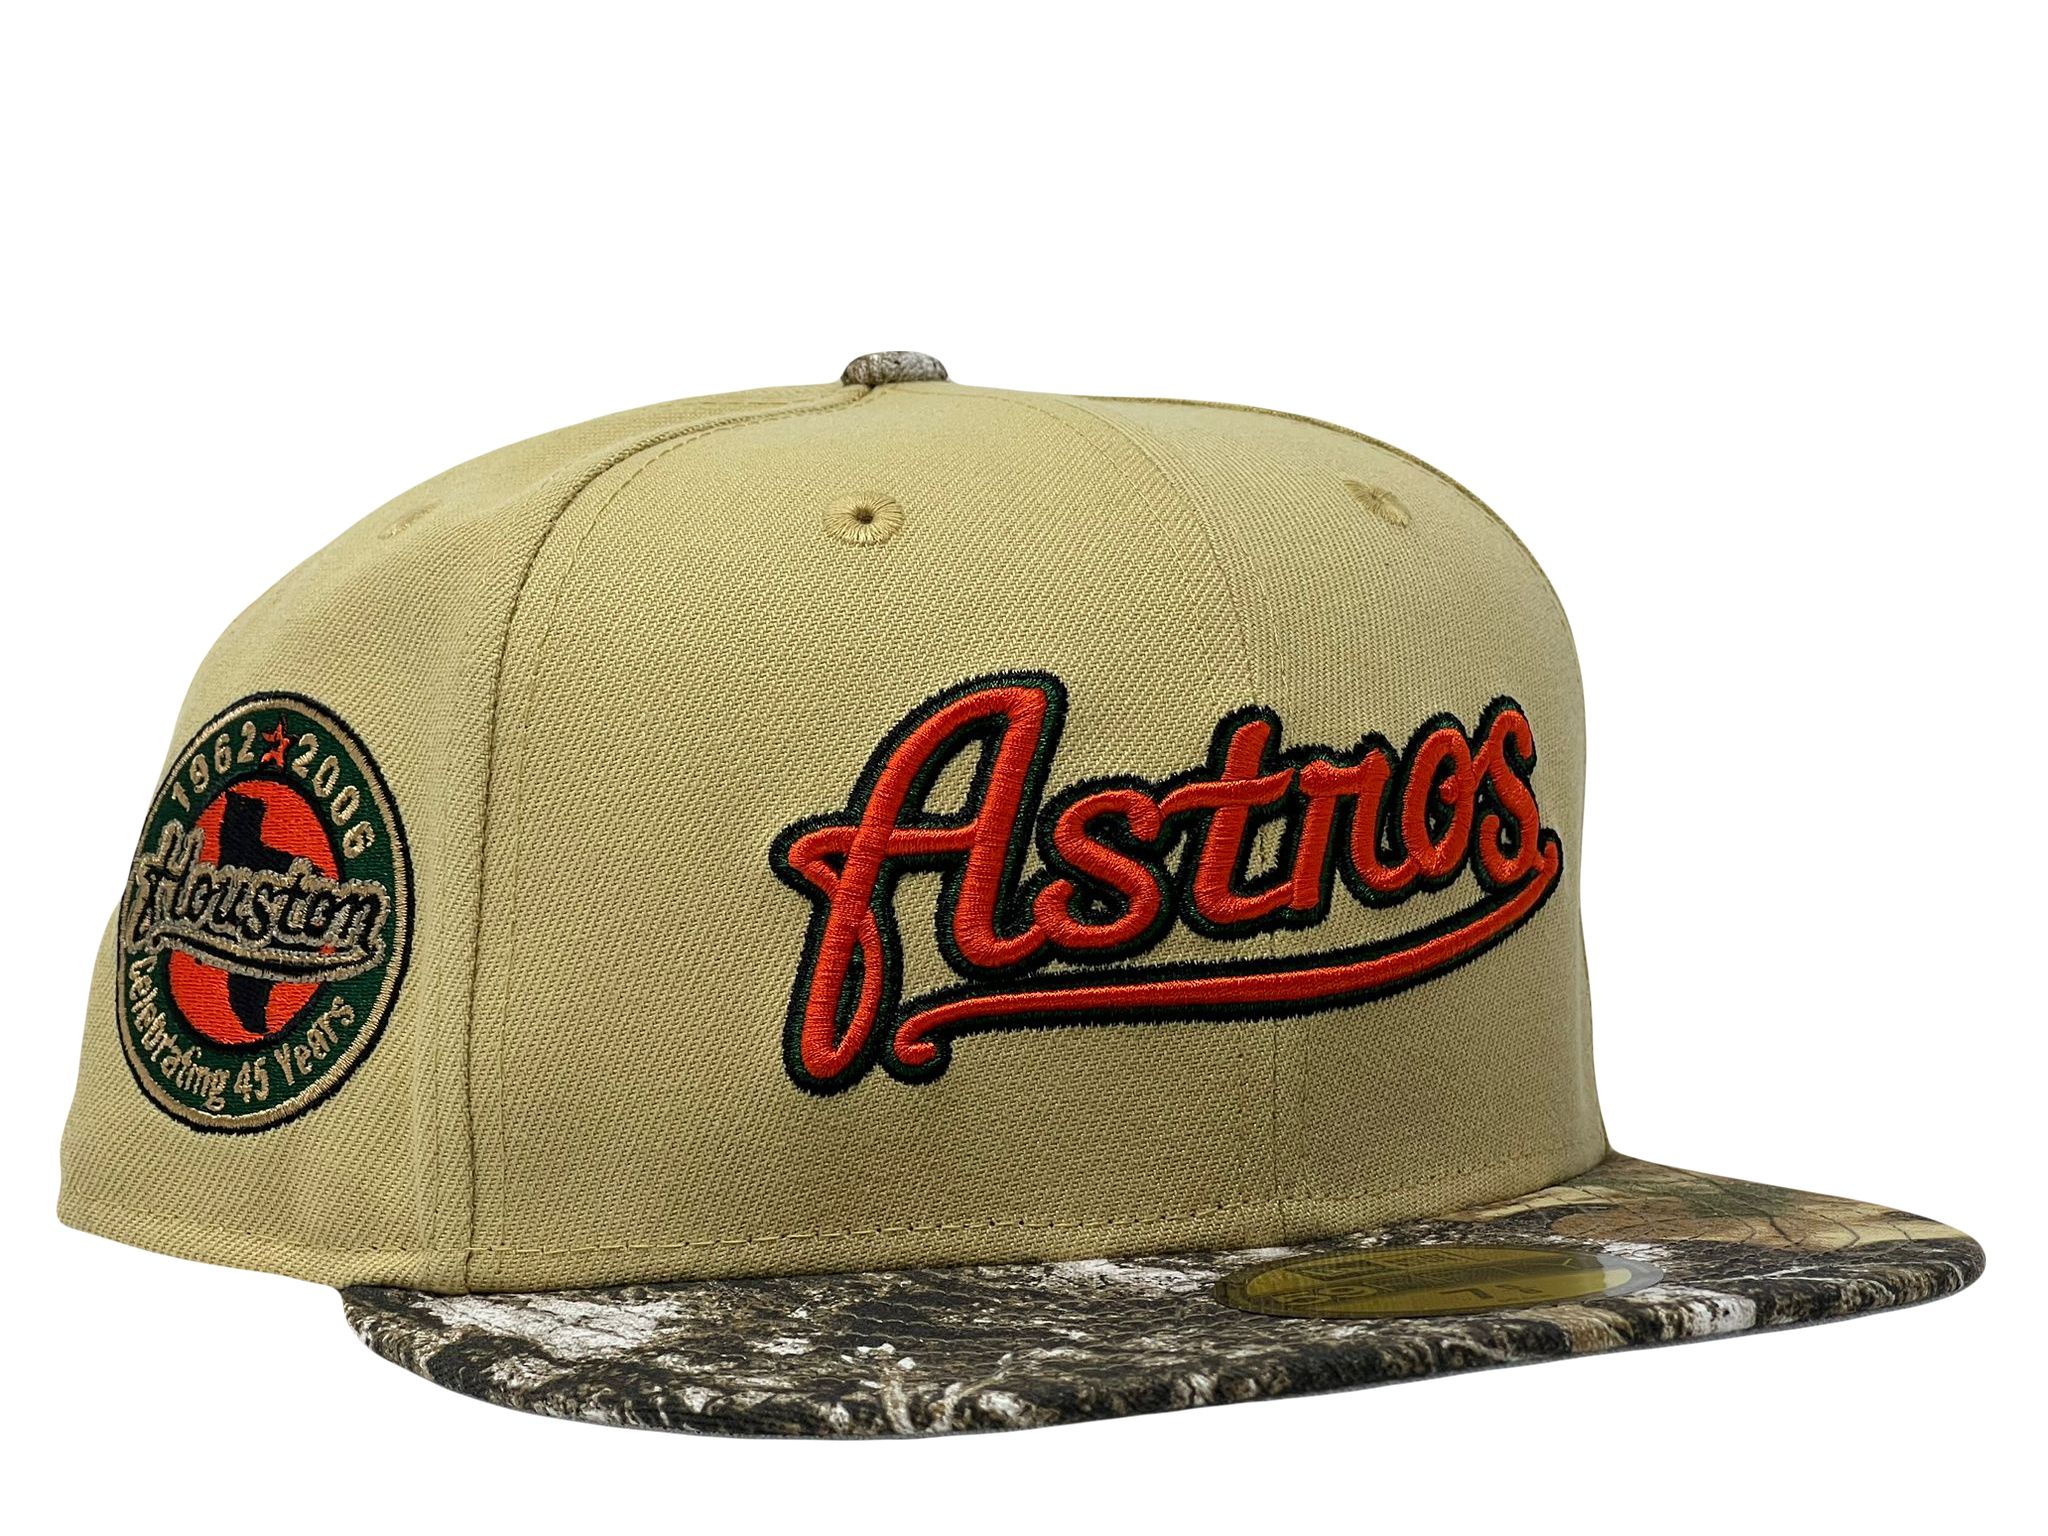 HOUSTON ASTROS 45TH ANNIVERSARY REAL TREE COLLECTION GRAY BRIM